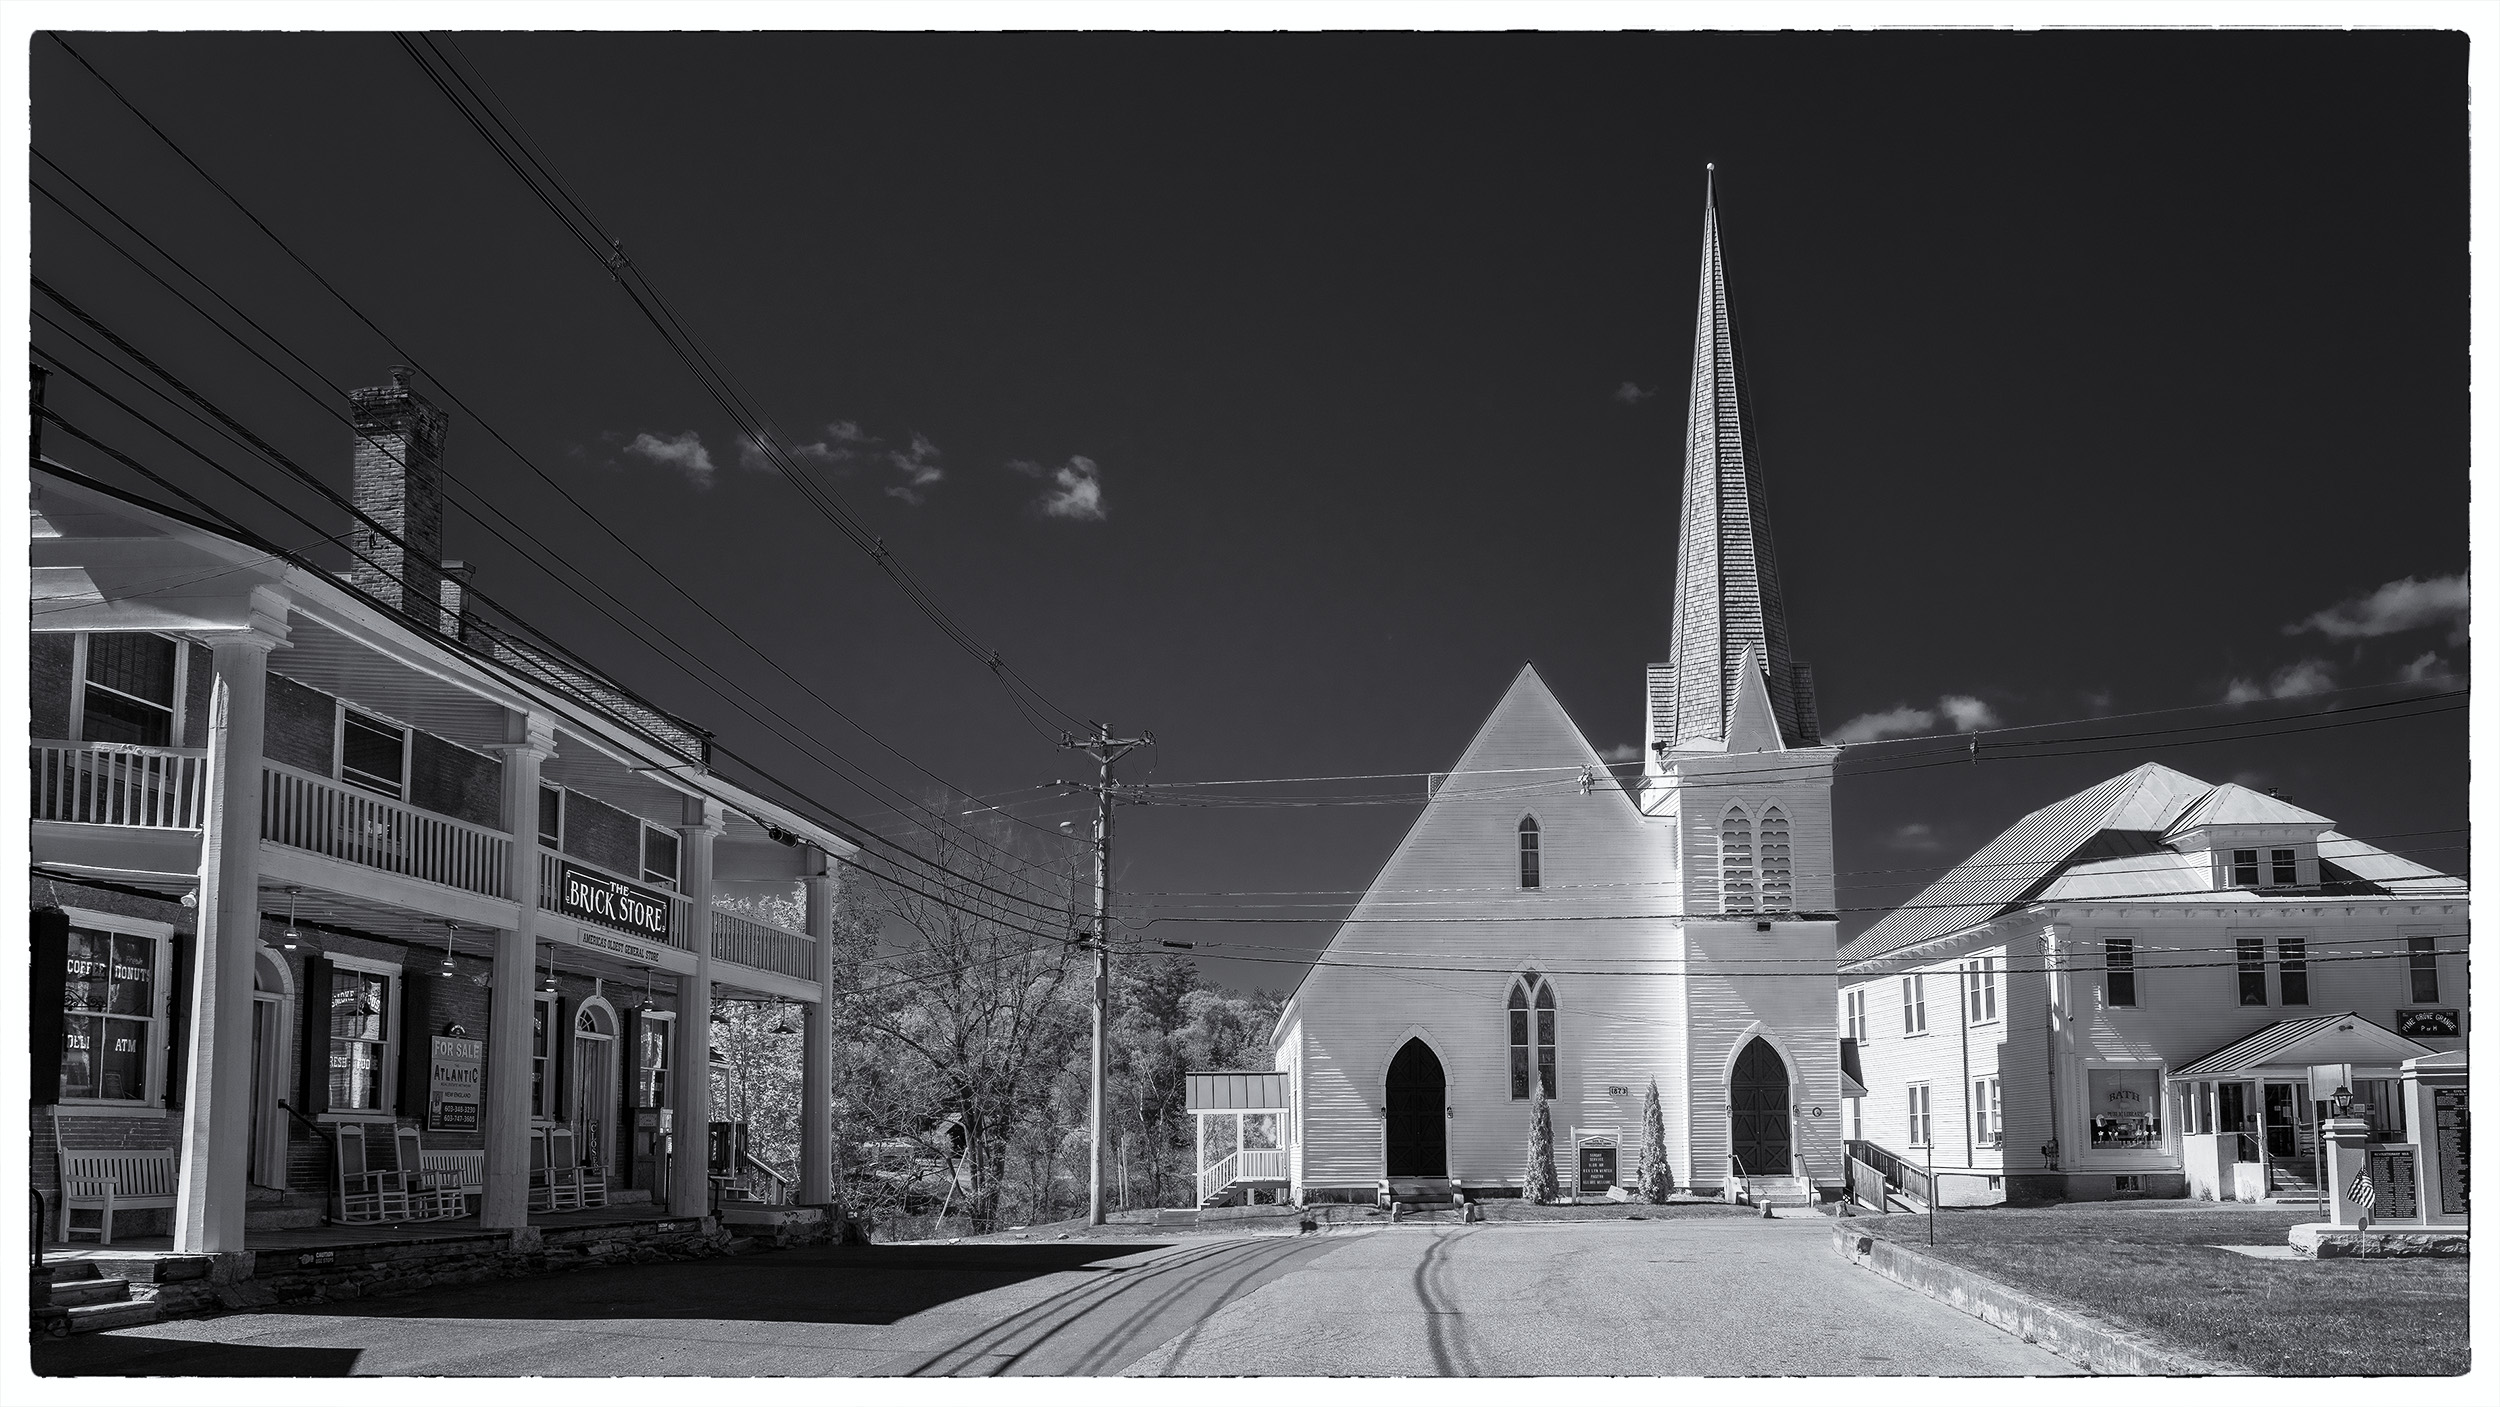 This panoramic view of Bath, New Hampshire, captured in black and white, evokes a sense of enduring tradition. Dominating the...